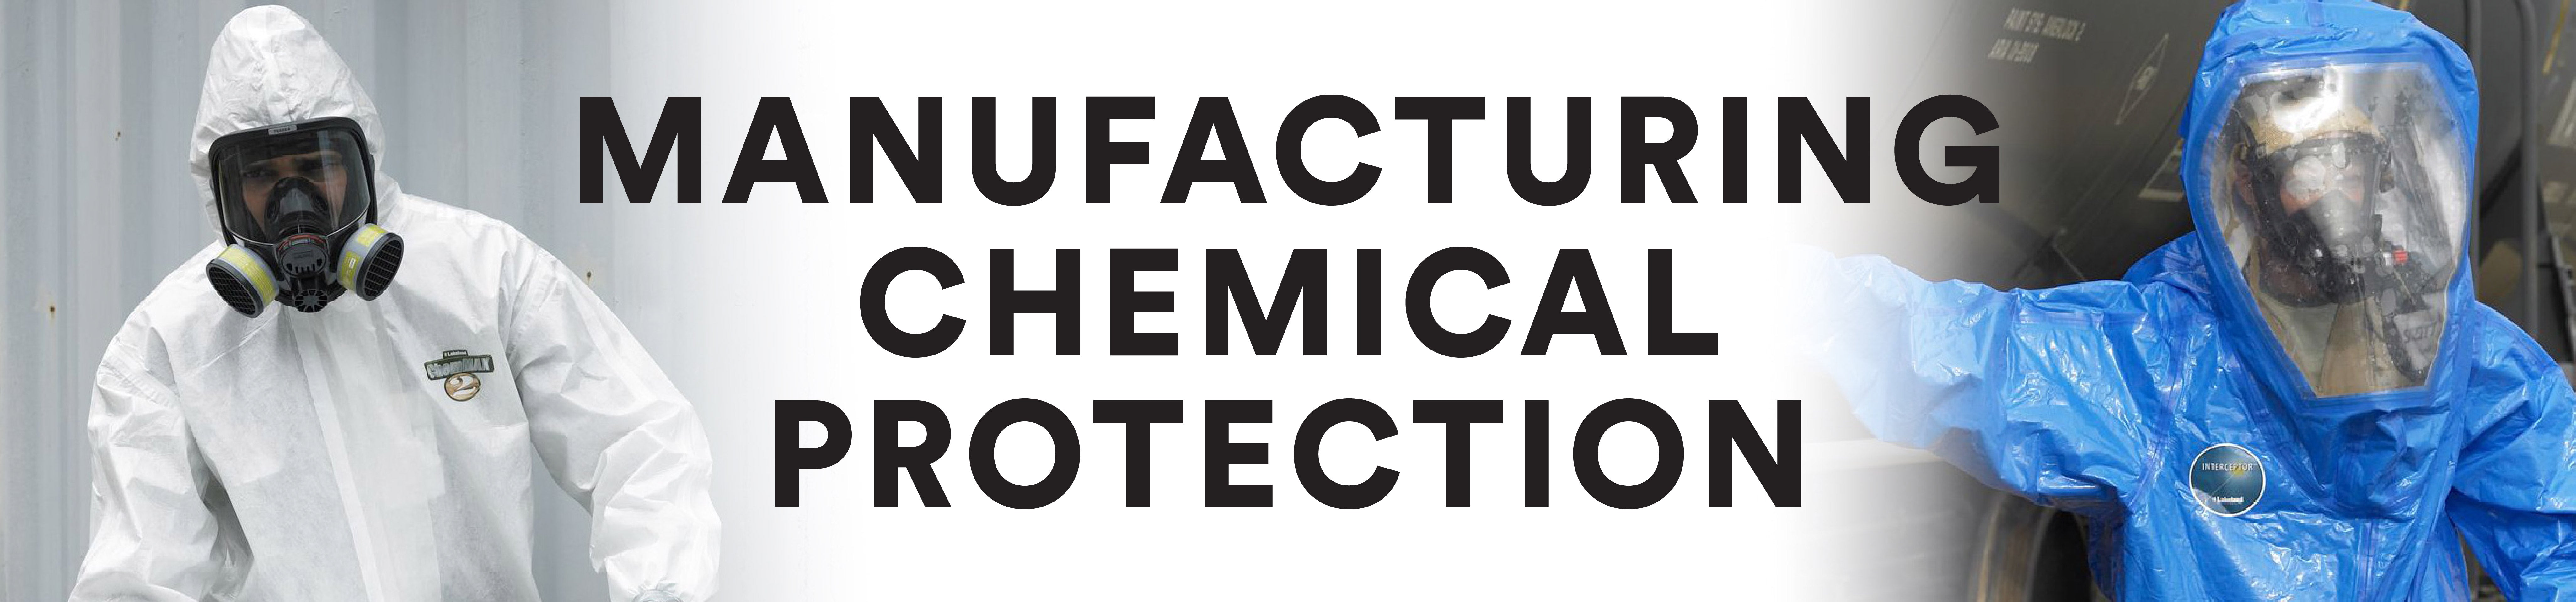 Manufacturing Chemical Protection